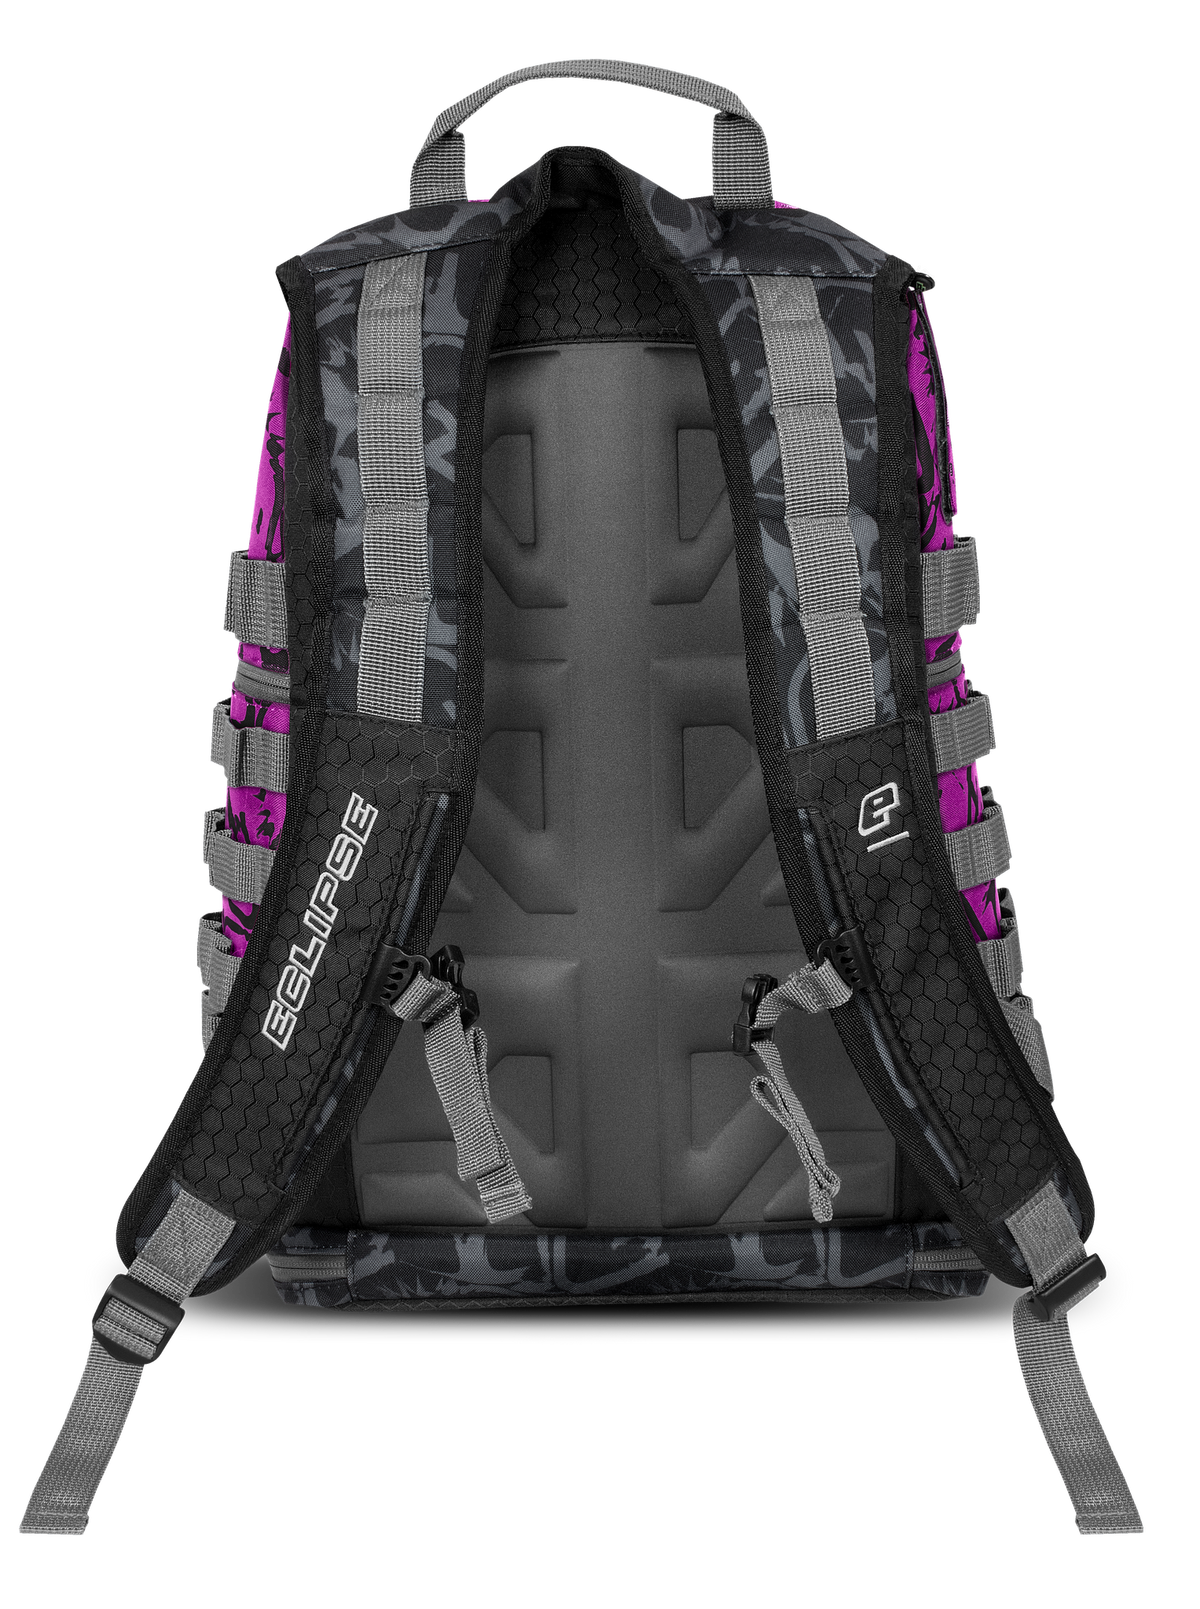 Planet Eclipse GX Gravel Backpack - Charcoal (ZYX-0168)